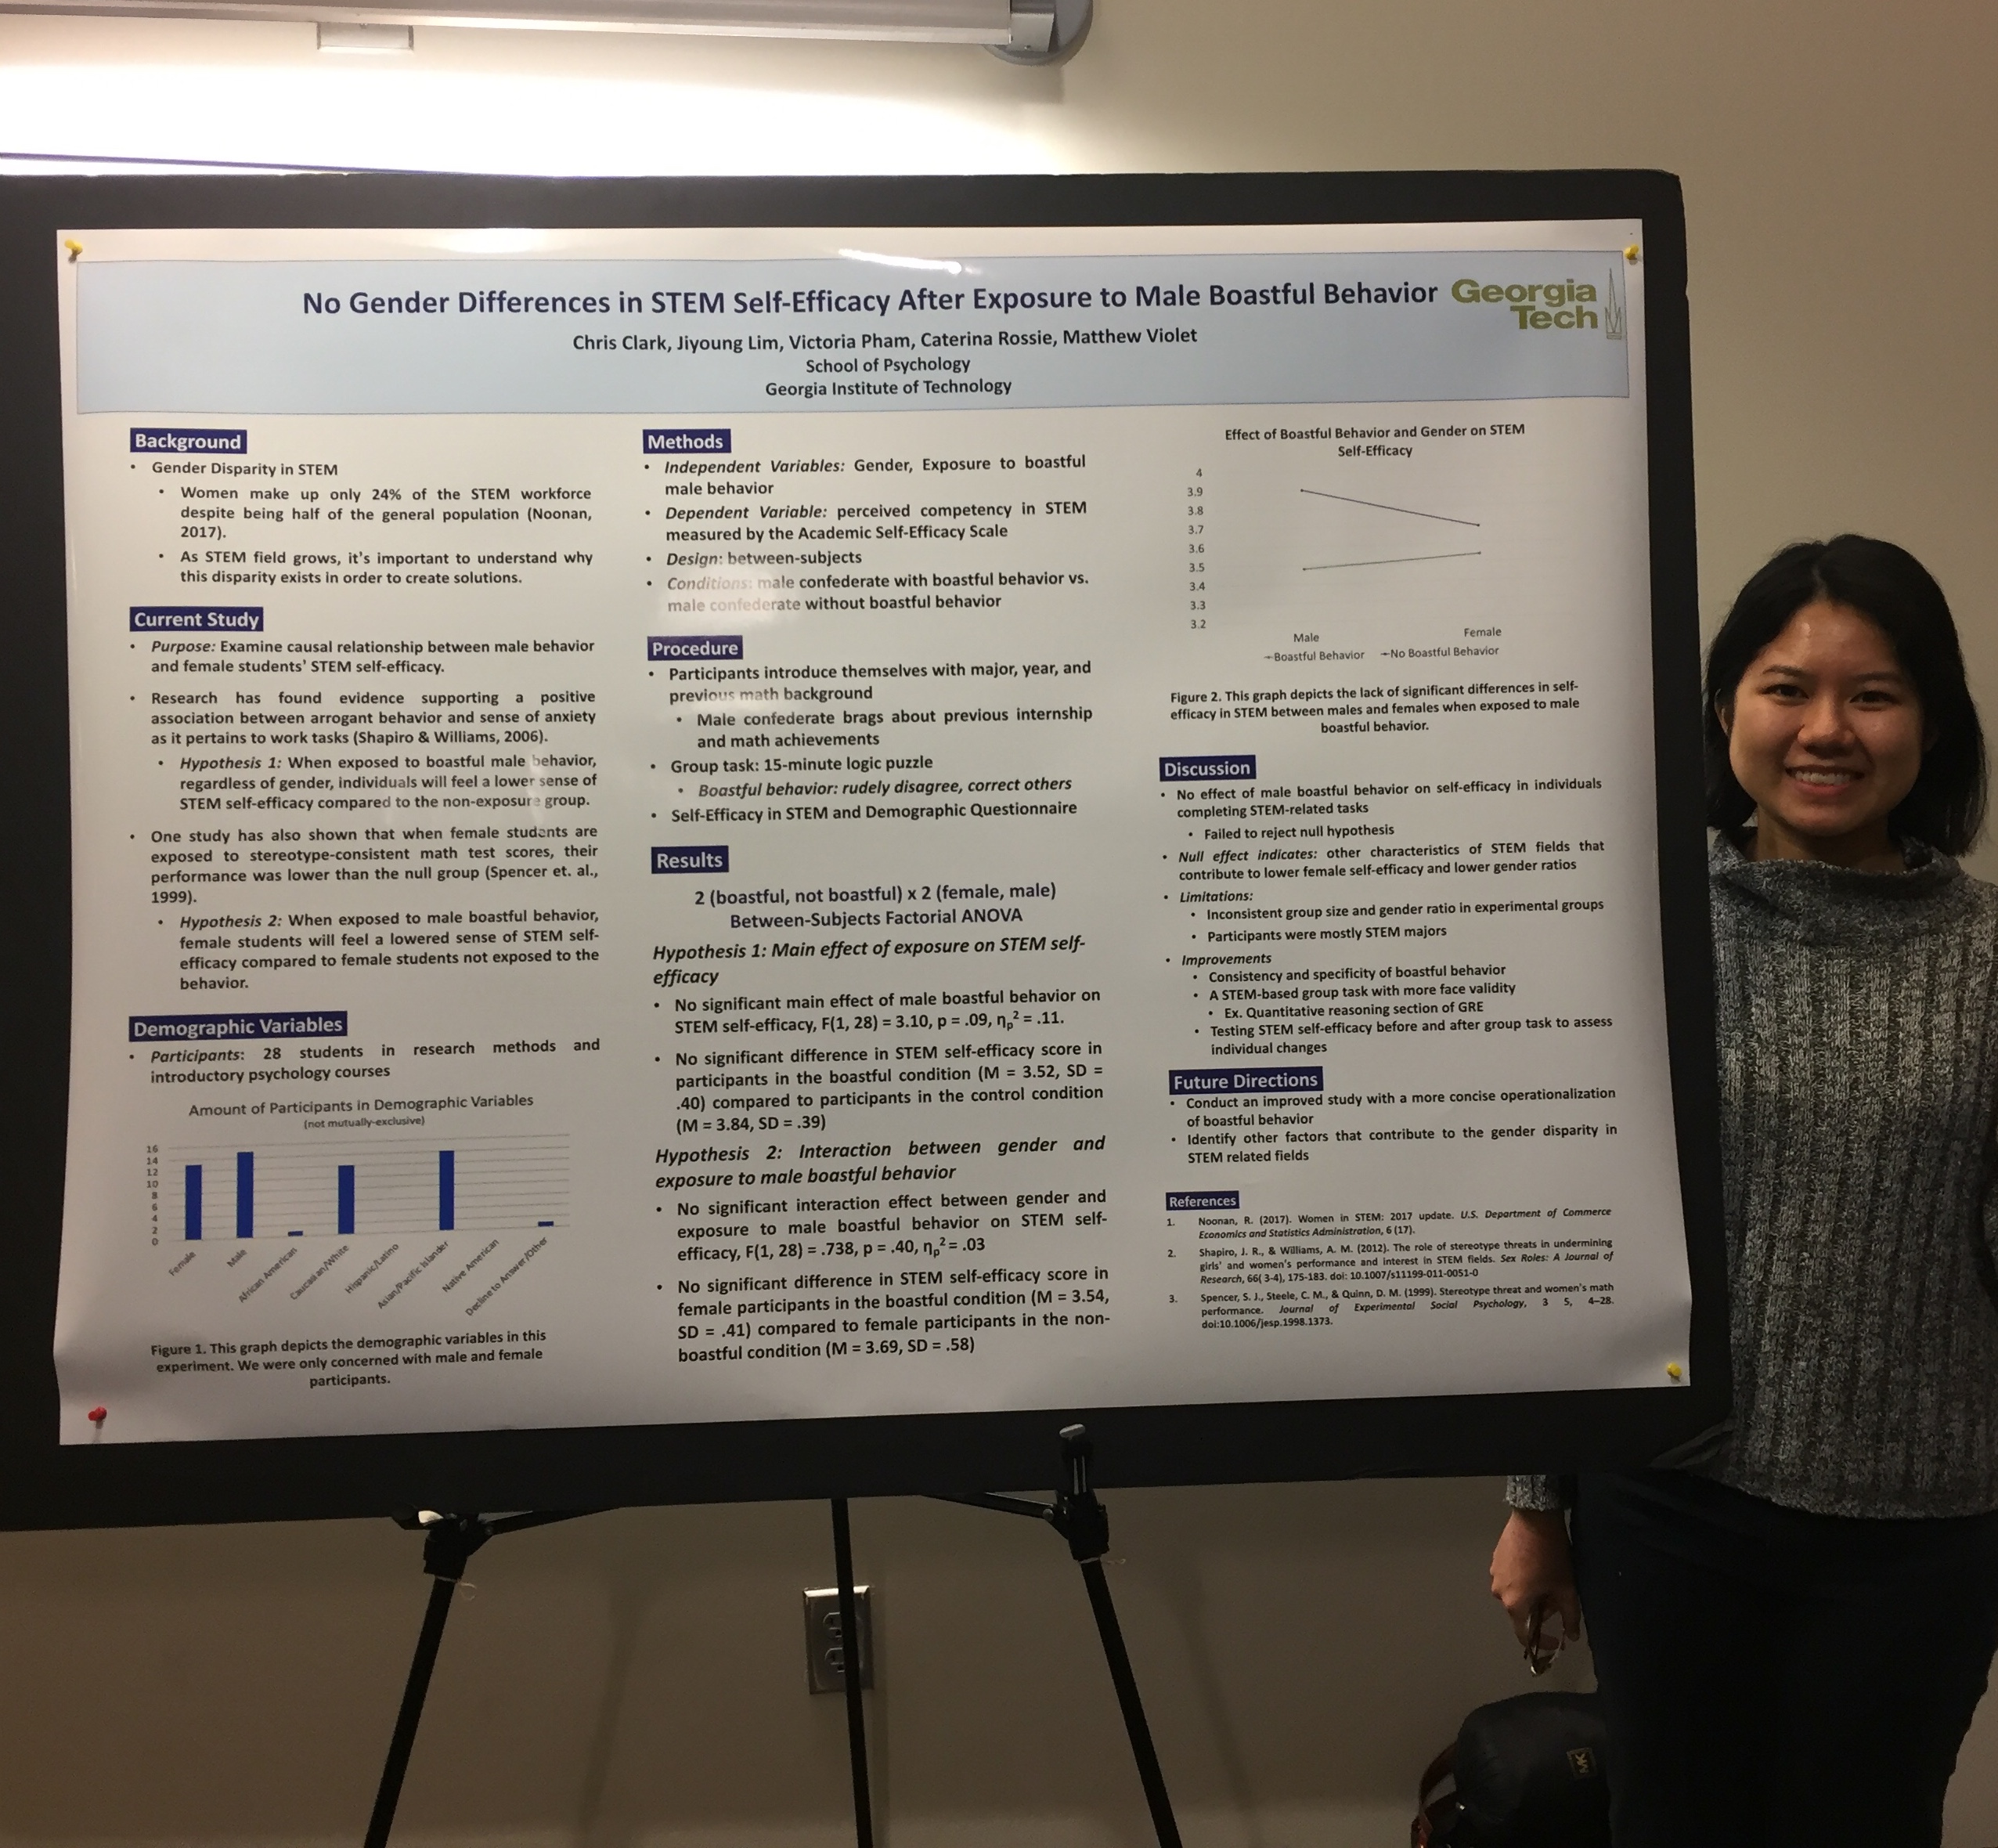 Victoria Pham and her Fall 2019 Final Presentation in Research Methods